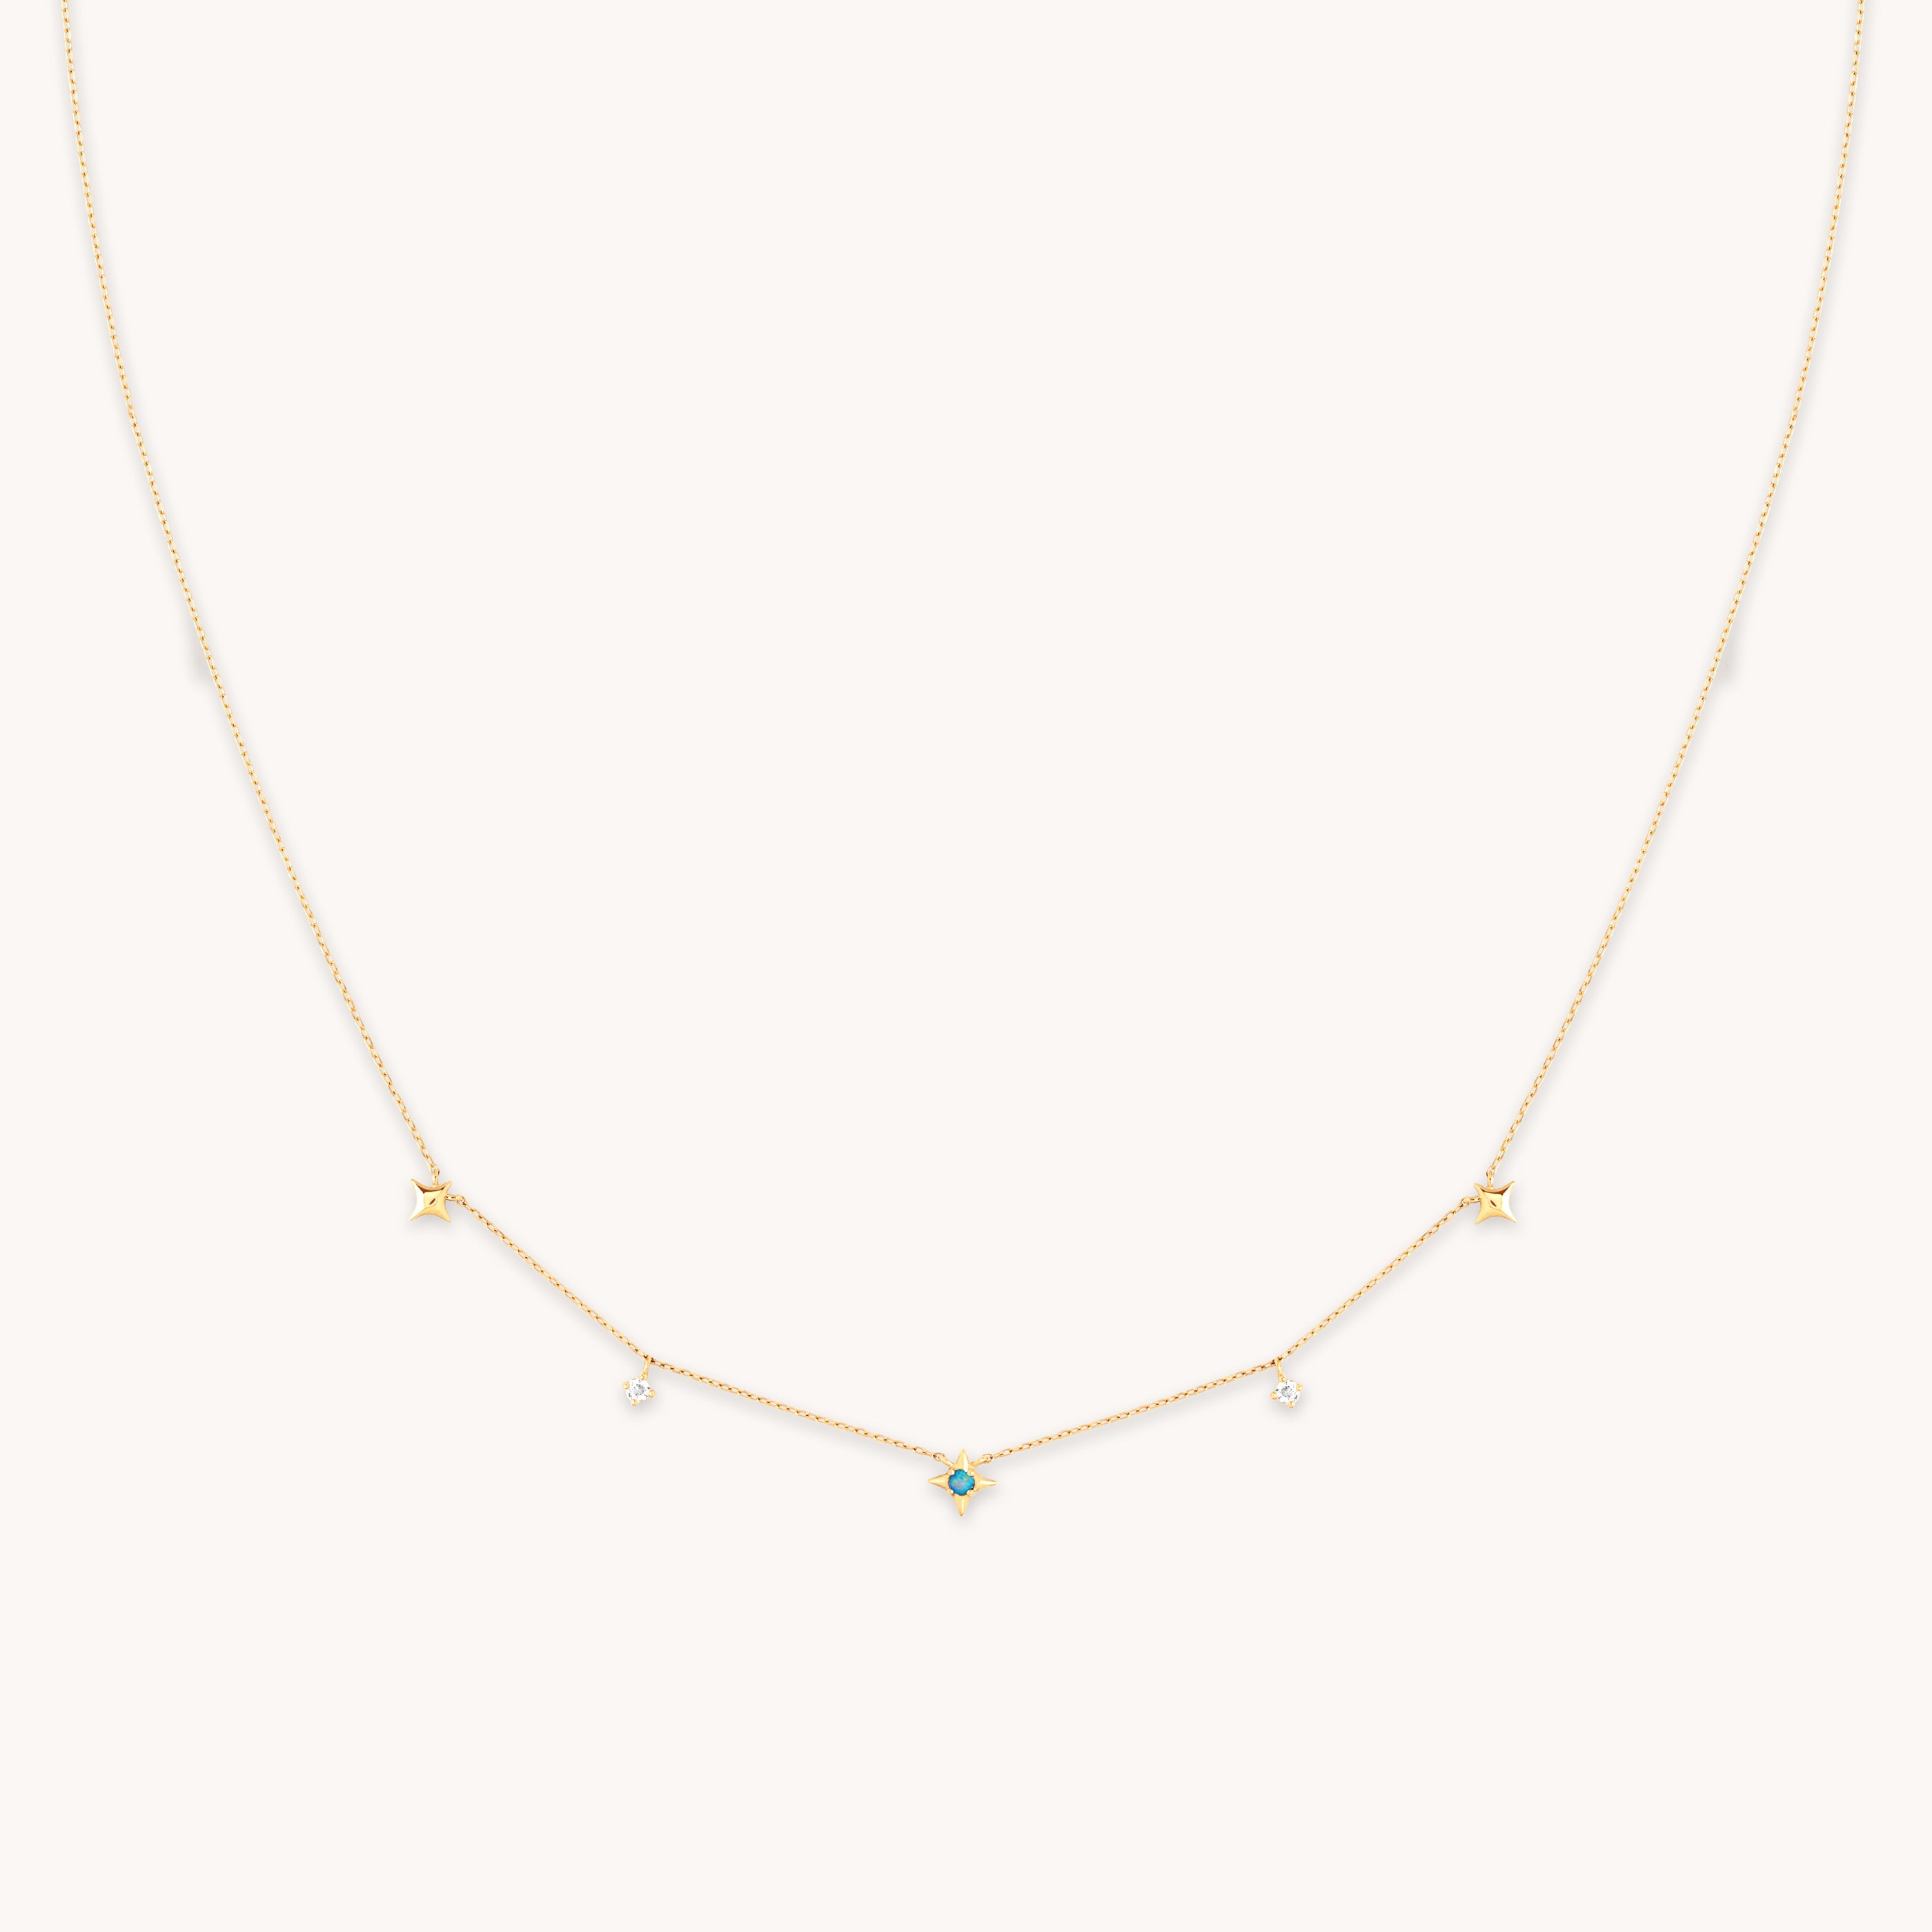 Cosmic Star Opal Charm Necklace in Solid Gold